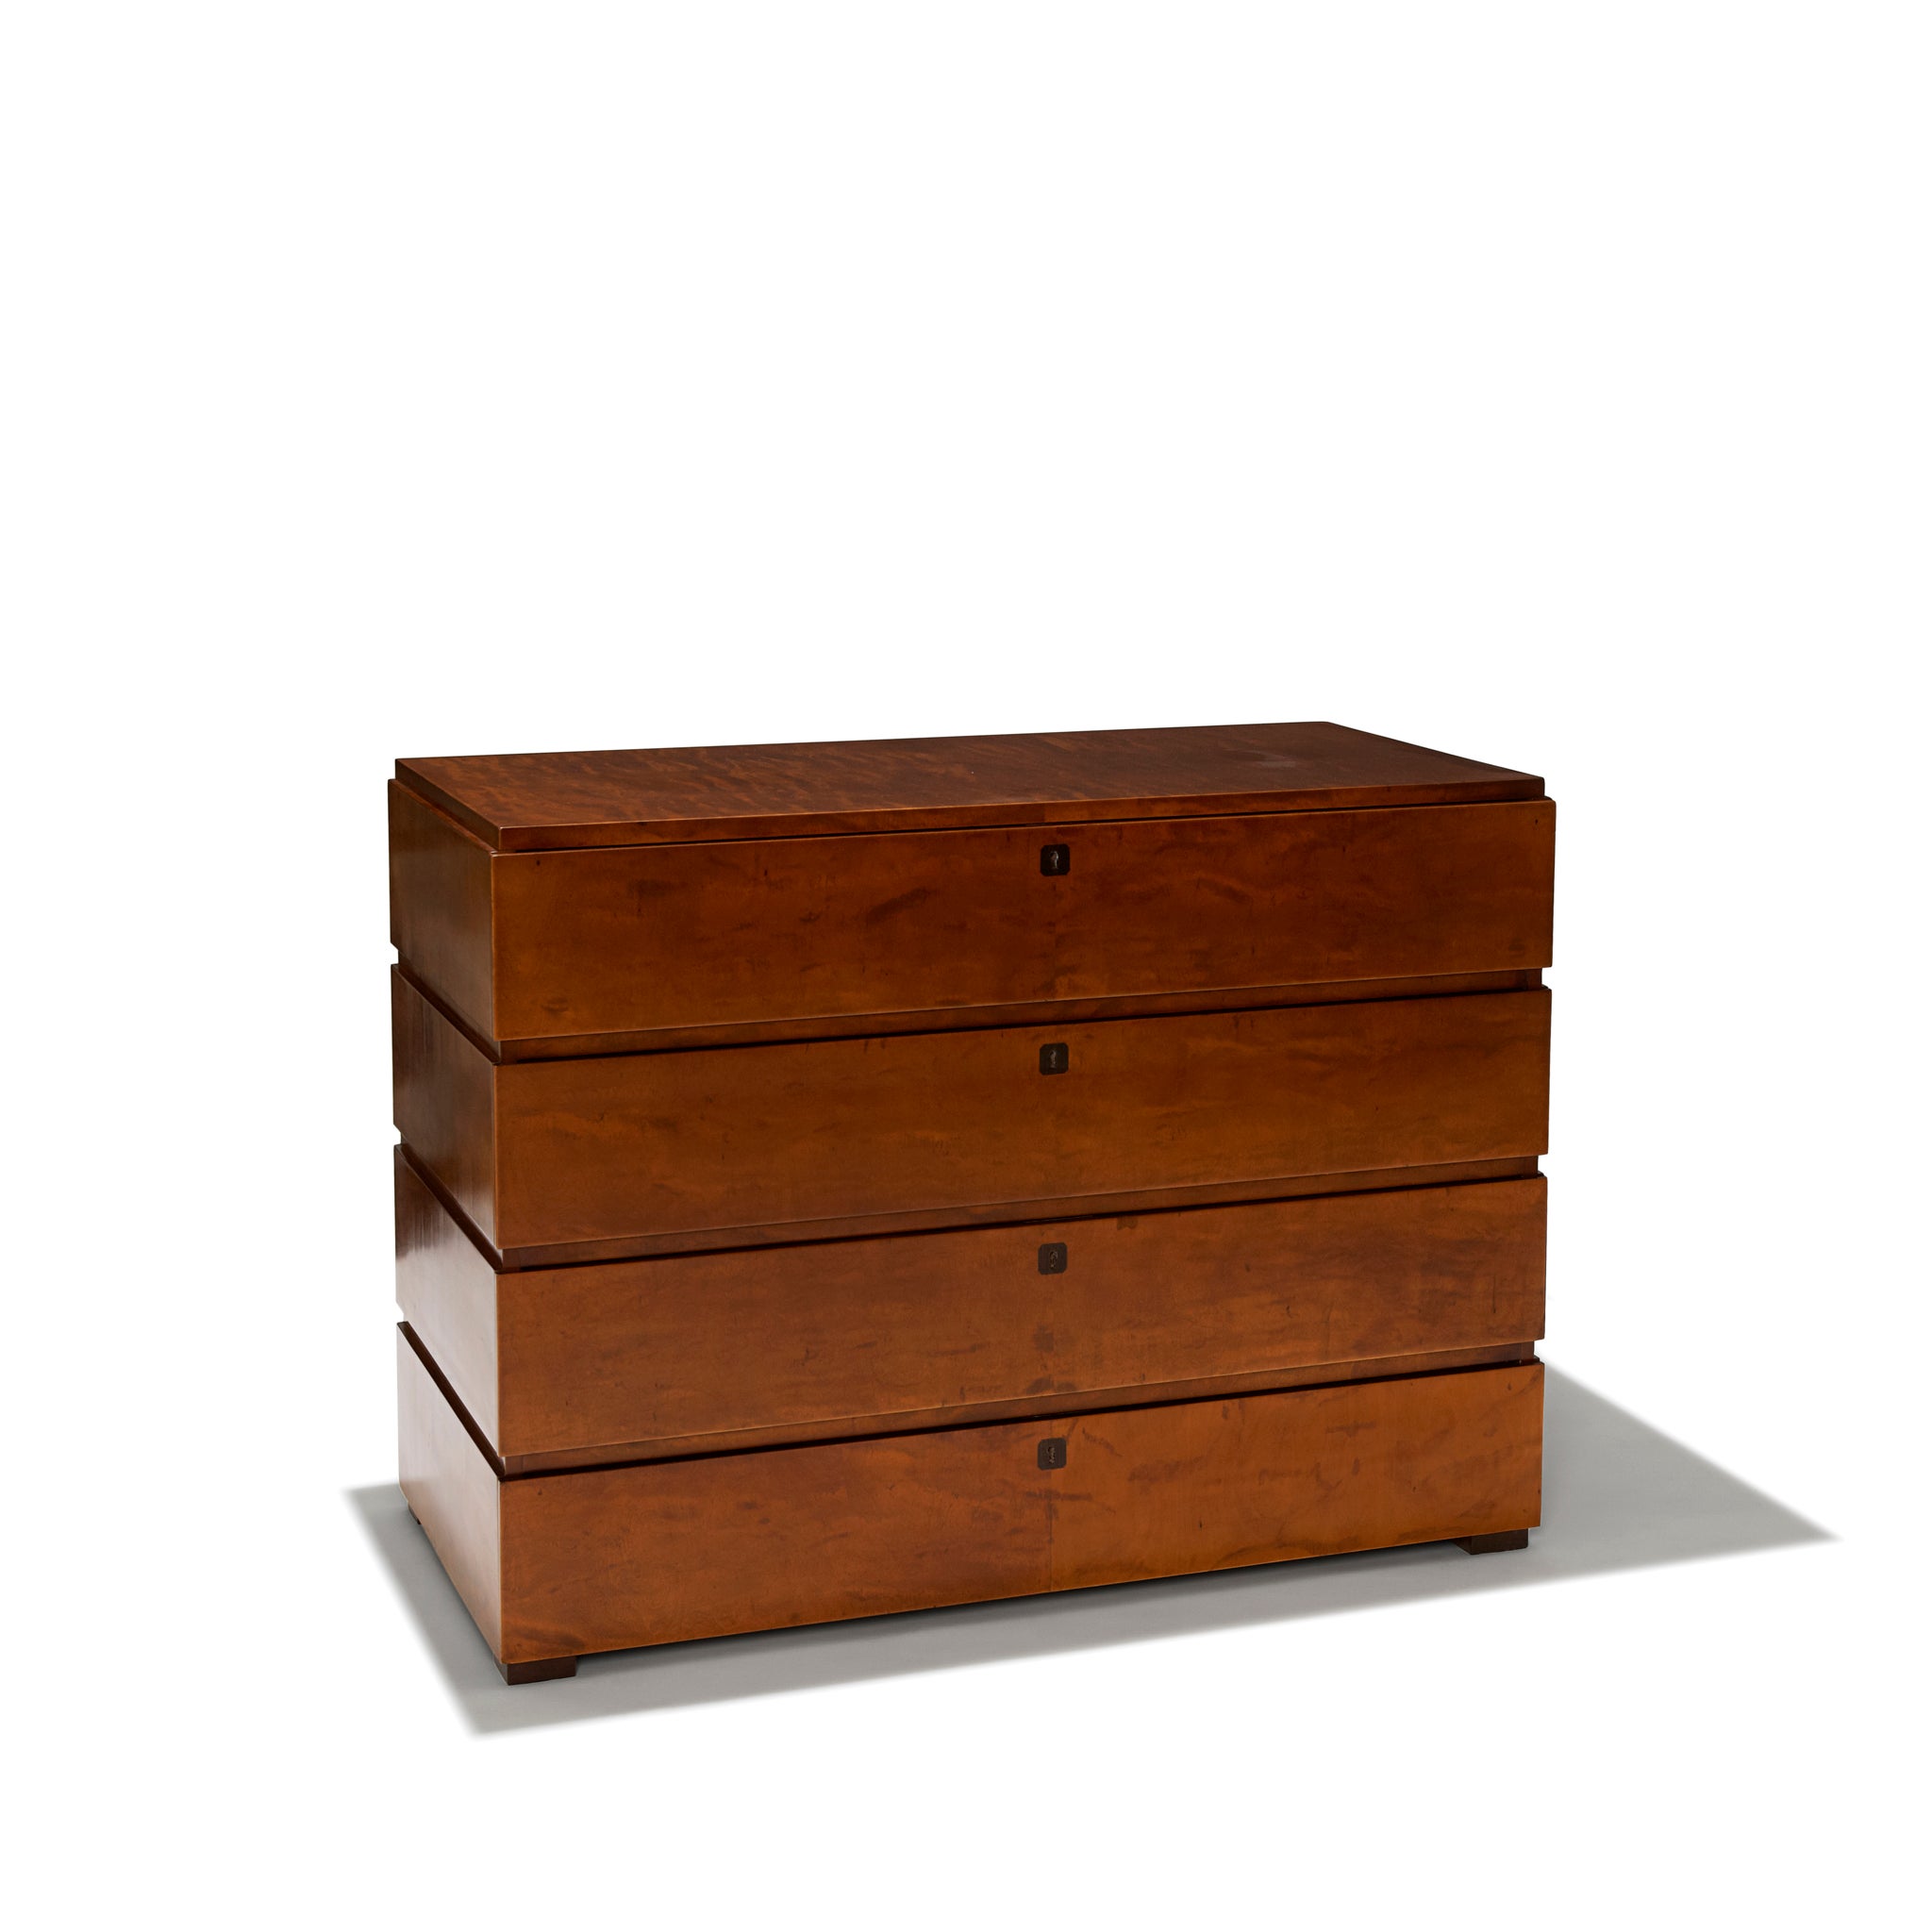 "Typenko" chest of drawers in Baltic birch by Axel Einar Hjorth  